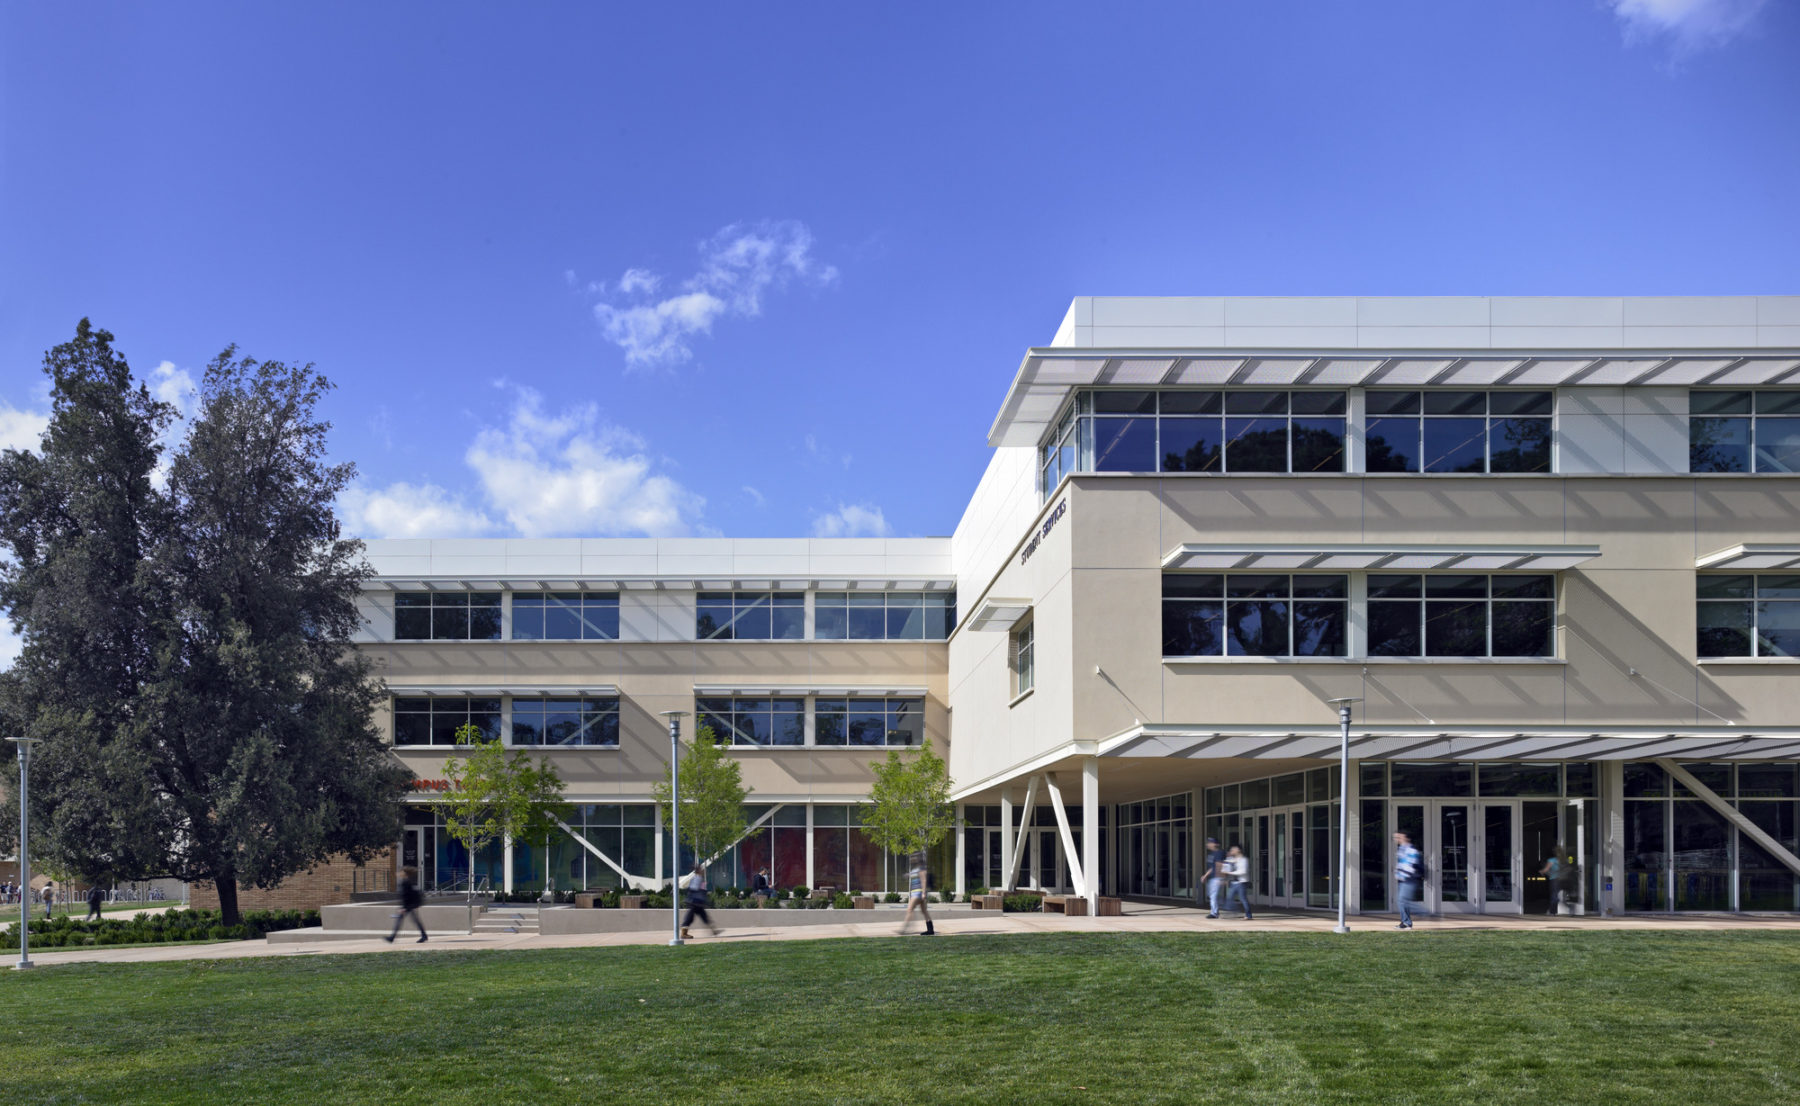 Exterior photo of building on a sunny day. Students walk along the path in front of the building